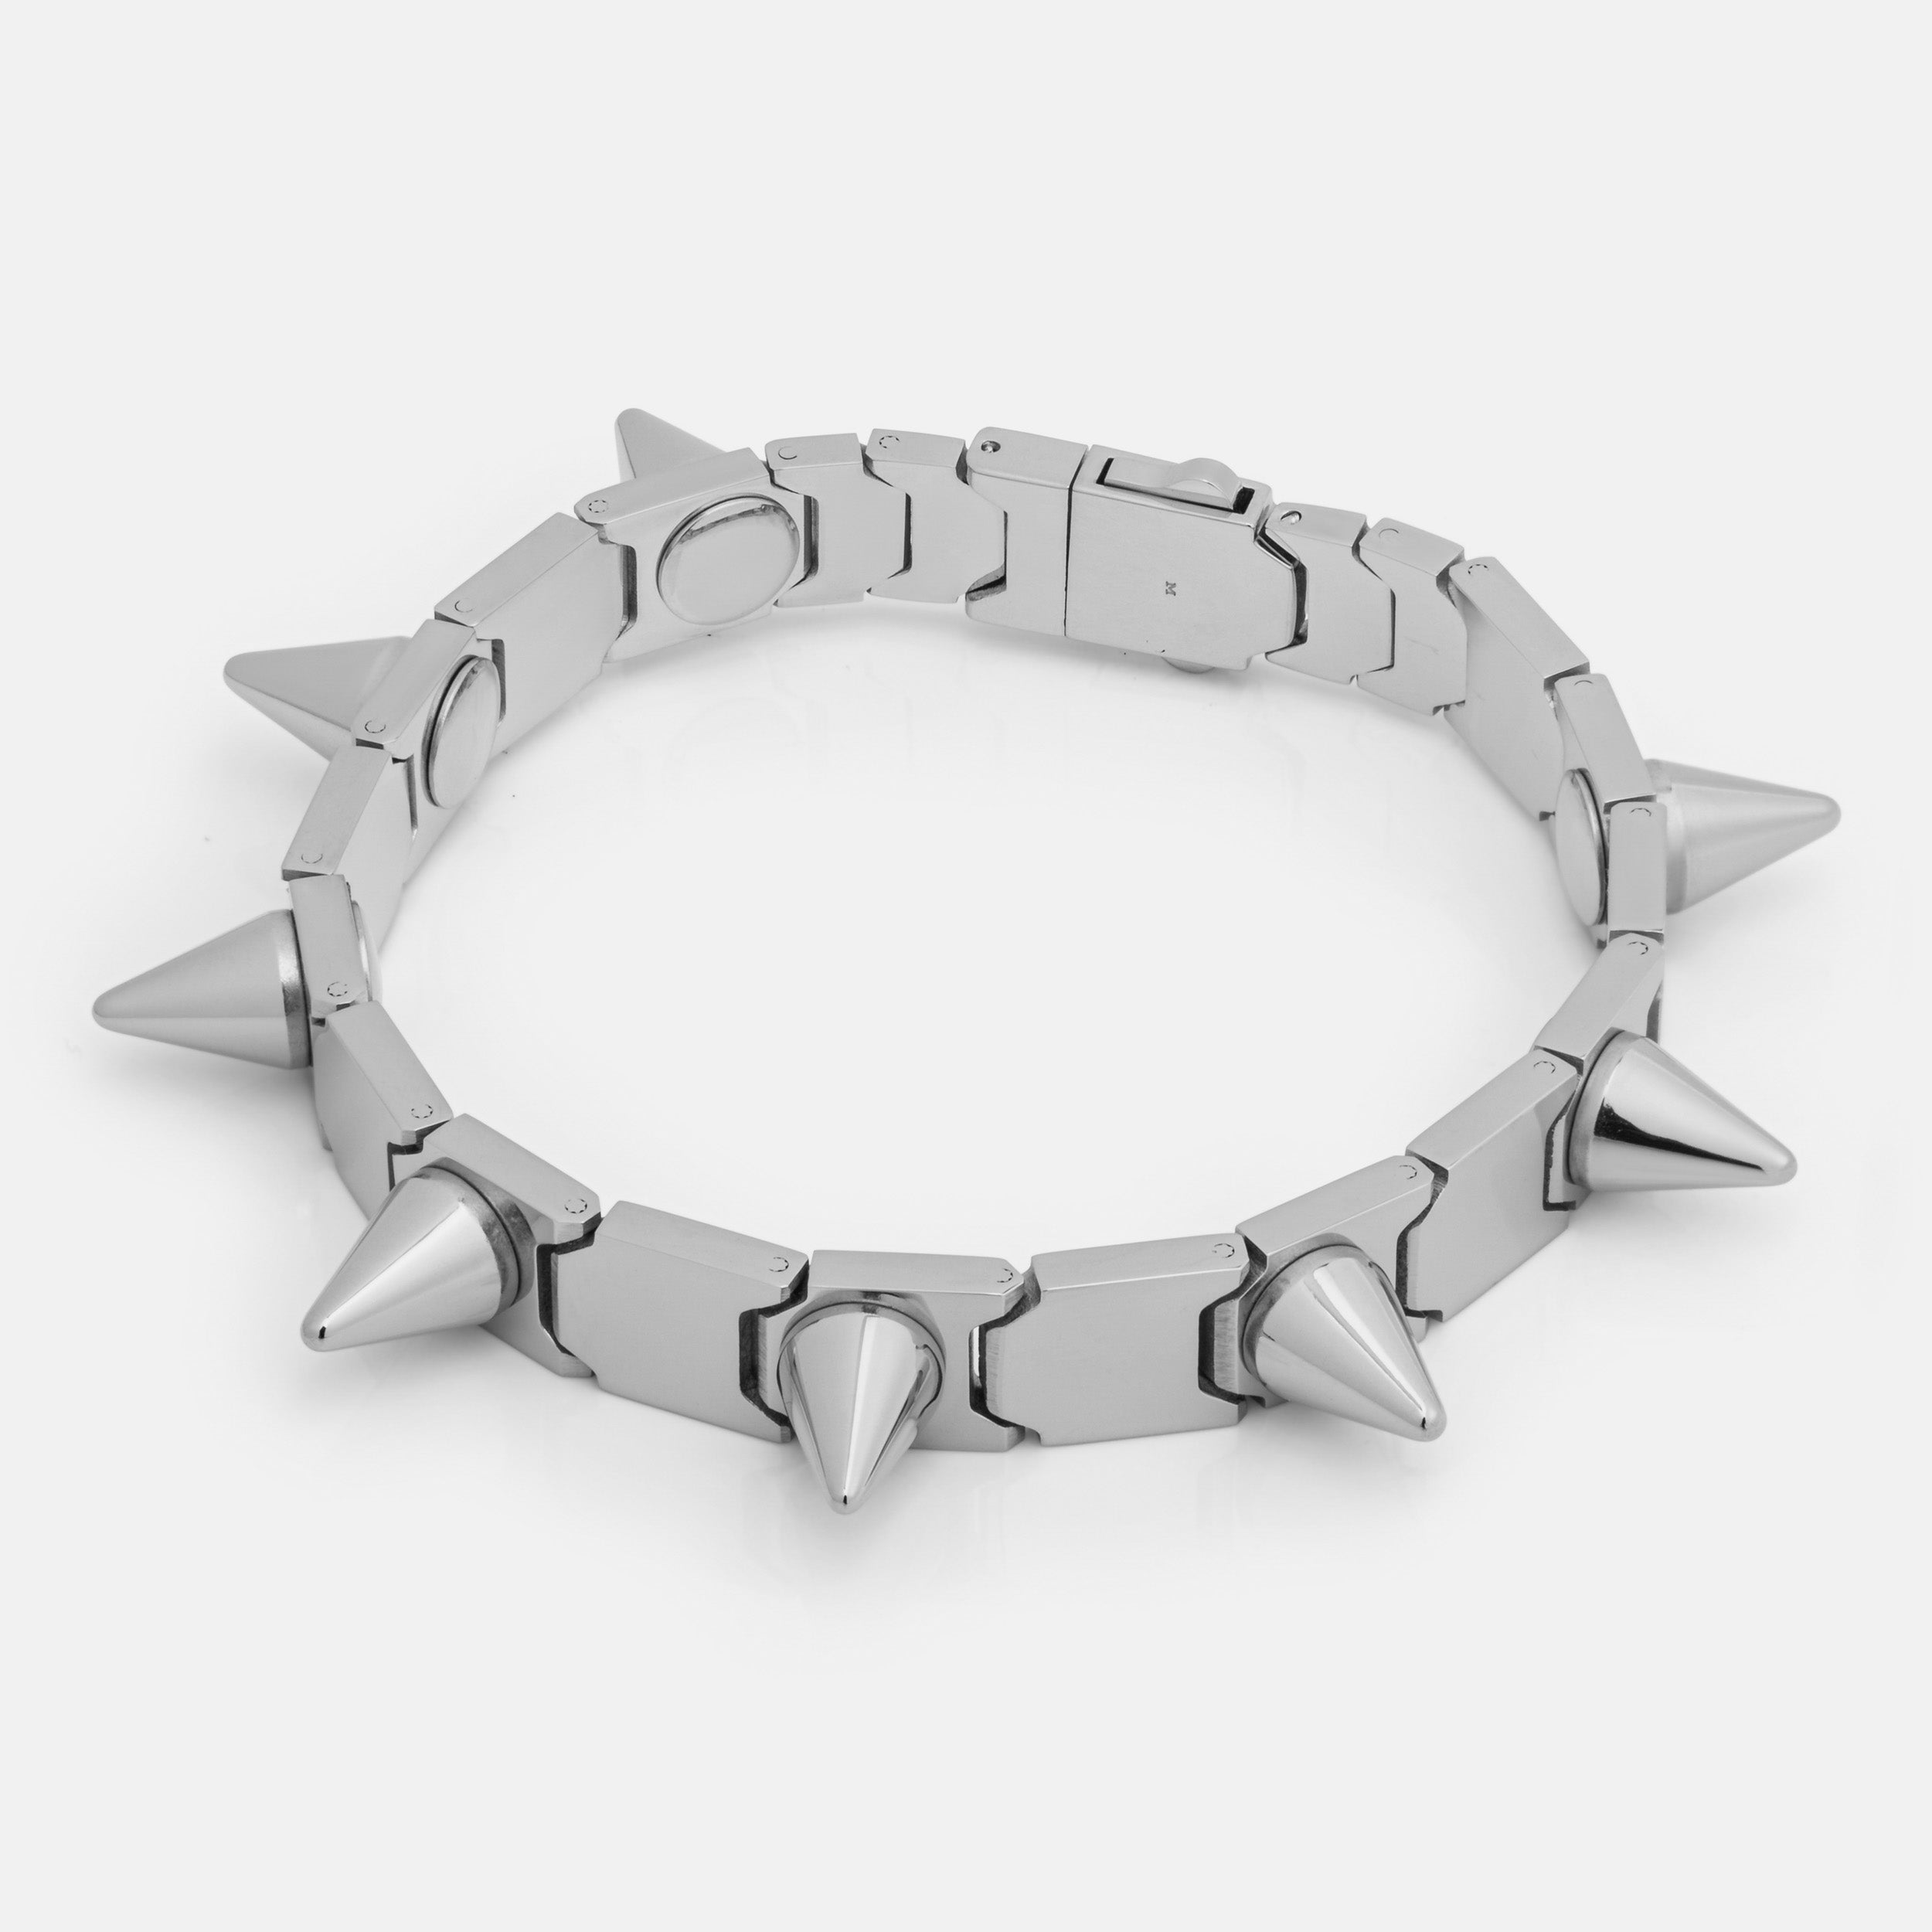 Vitaly Agitator Bracelet  100% Recycled Stainless Steel Accessories